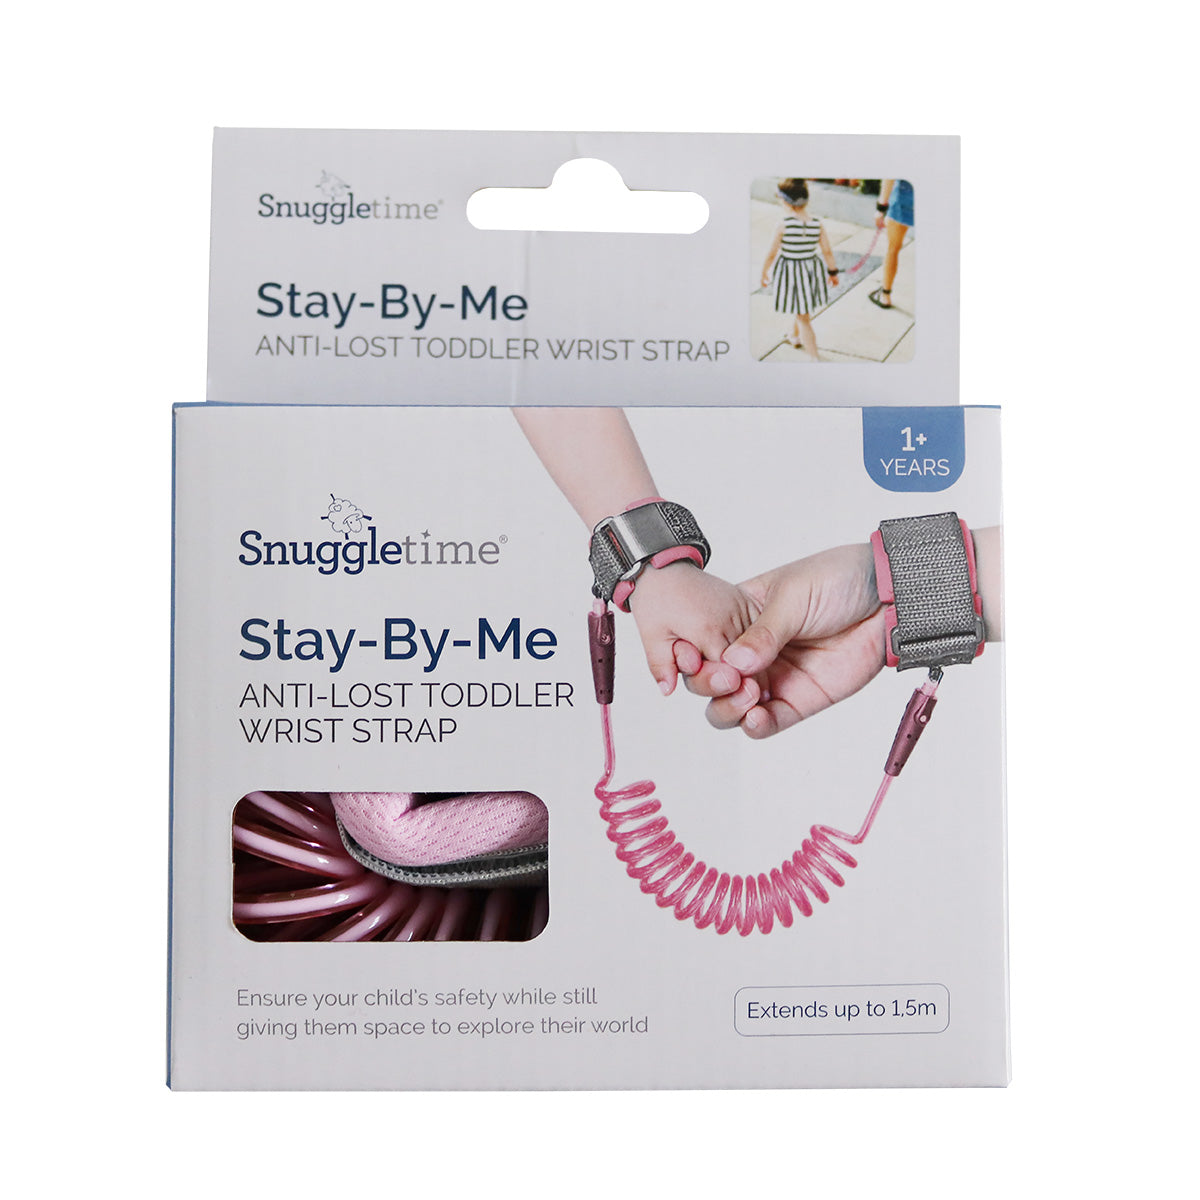 Snuggletime Stay-By-Me Anti-Lost Toddler Wrist Strap